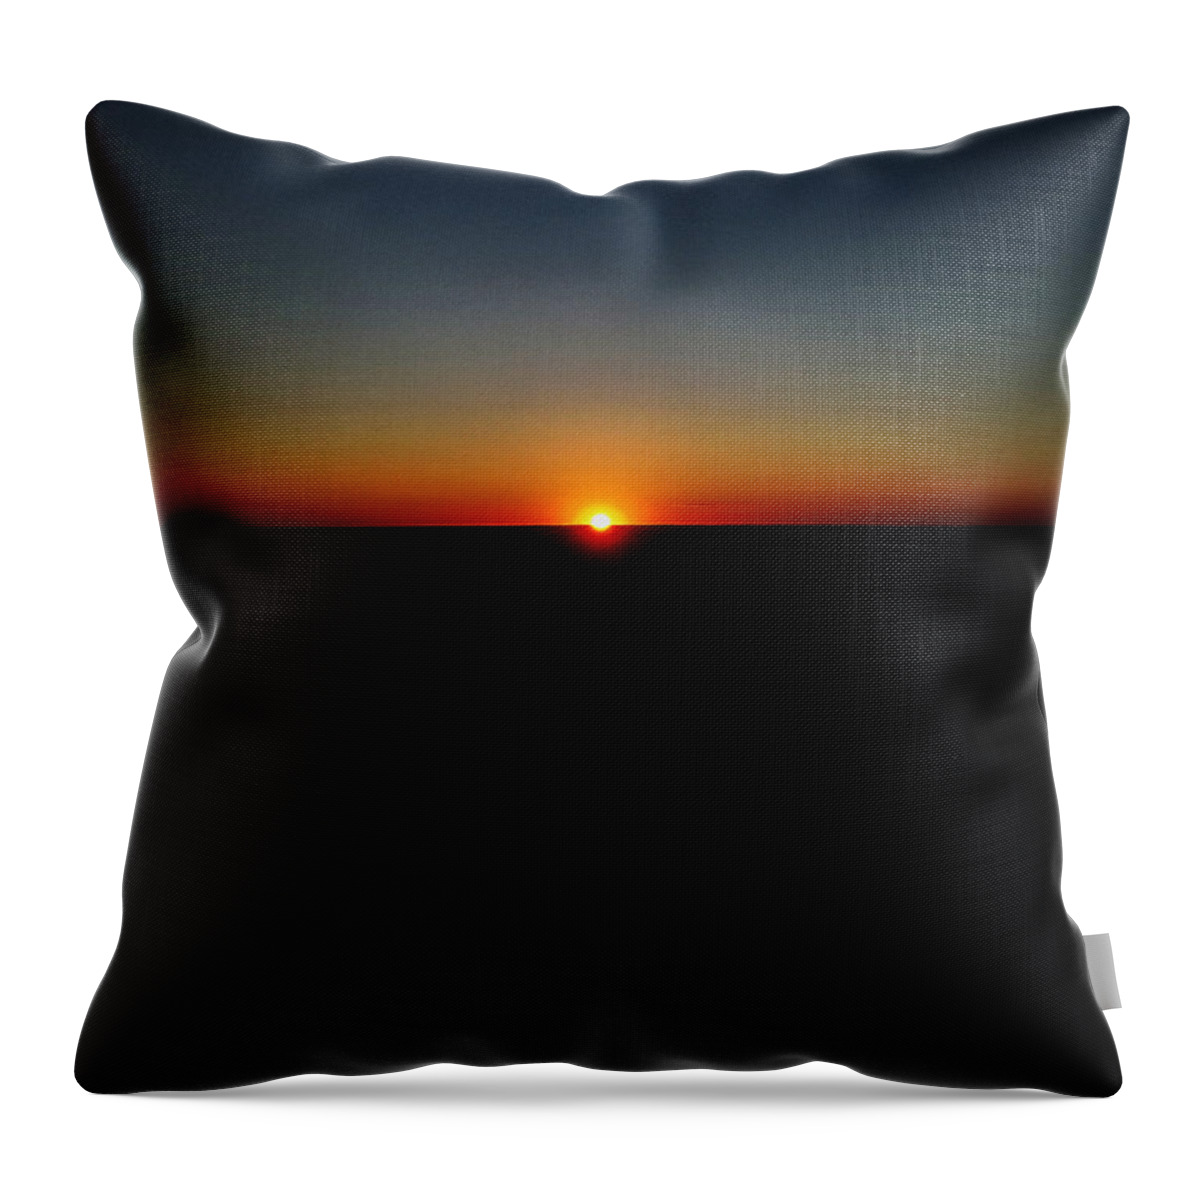  Throw Pillow featuring the photograph Sunset by Stephen Dorton